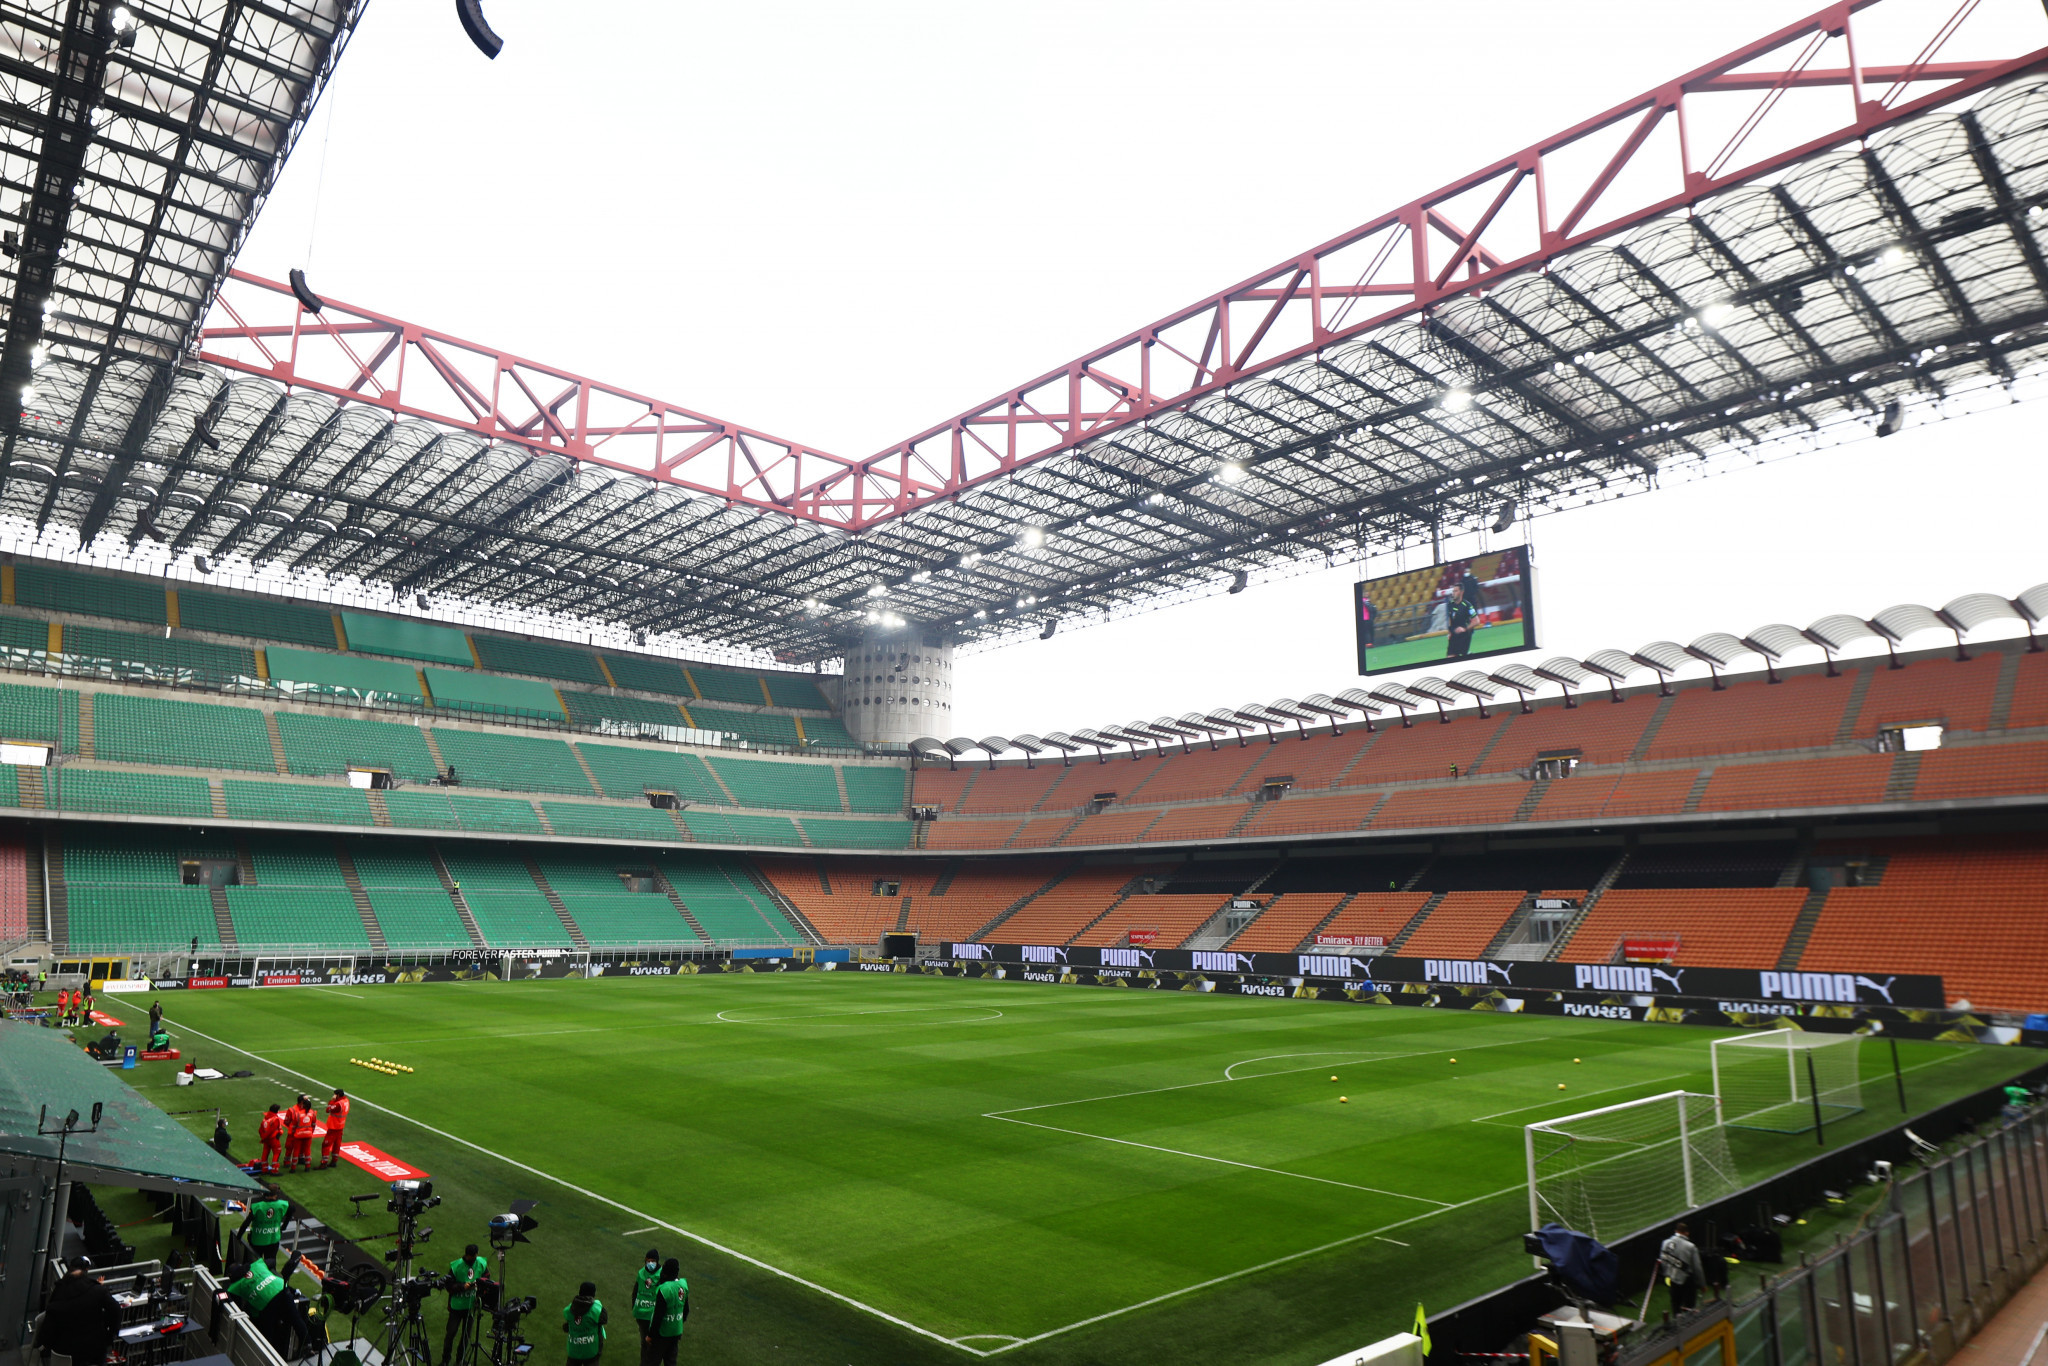 The San Siro is home to both AC Milan and Inter Milan, who have submitted two proposals to redevelop the site ©Getty Images